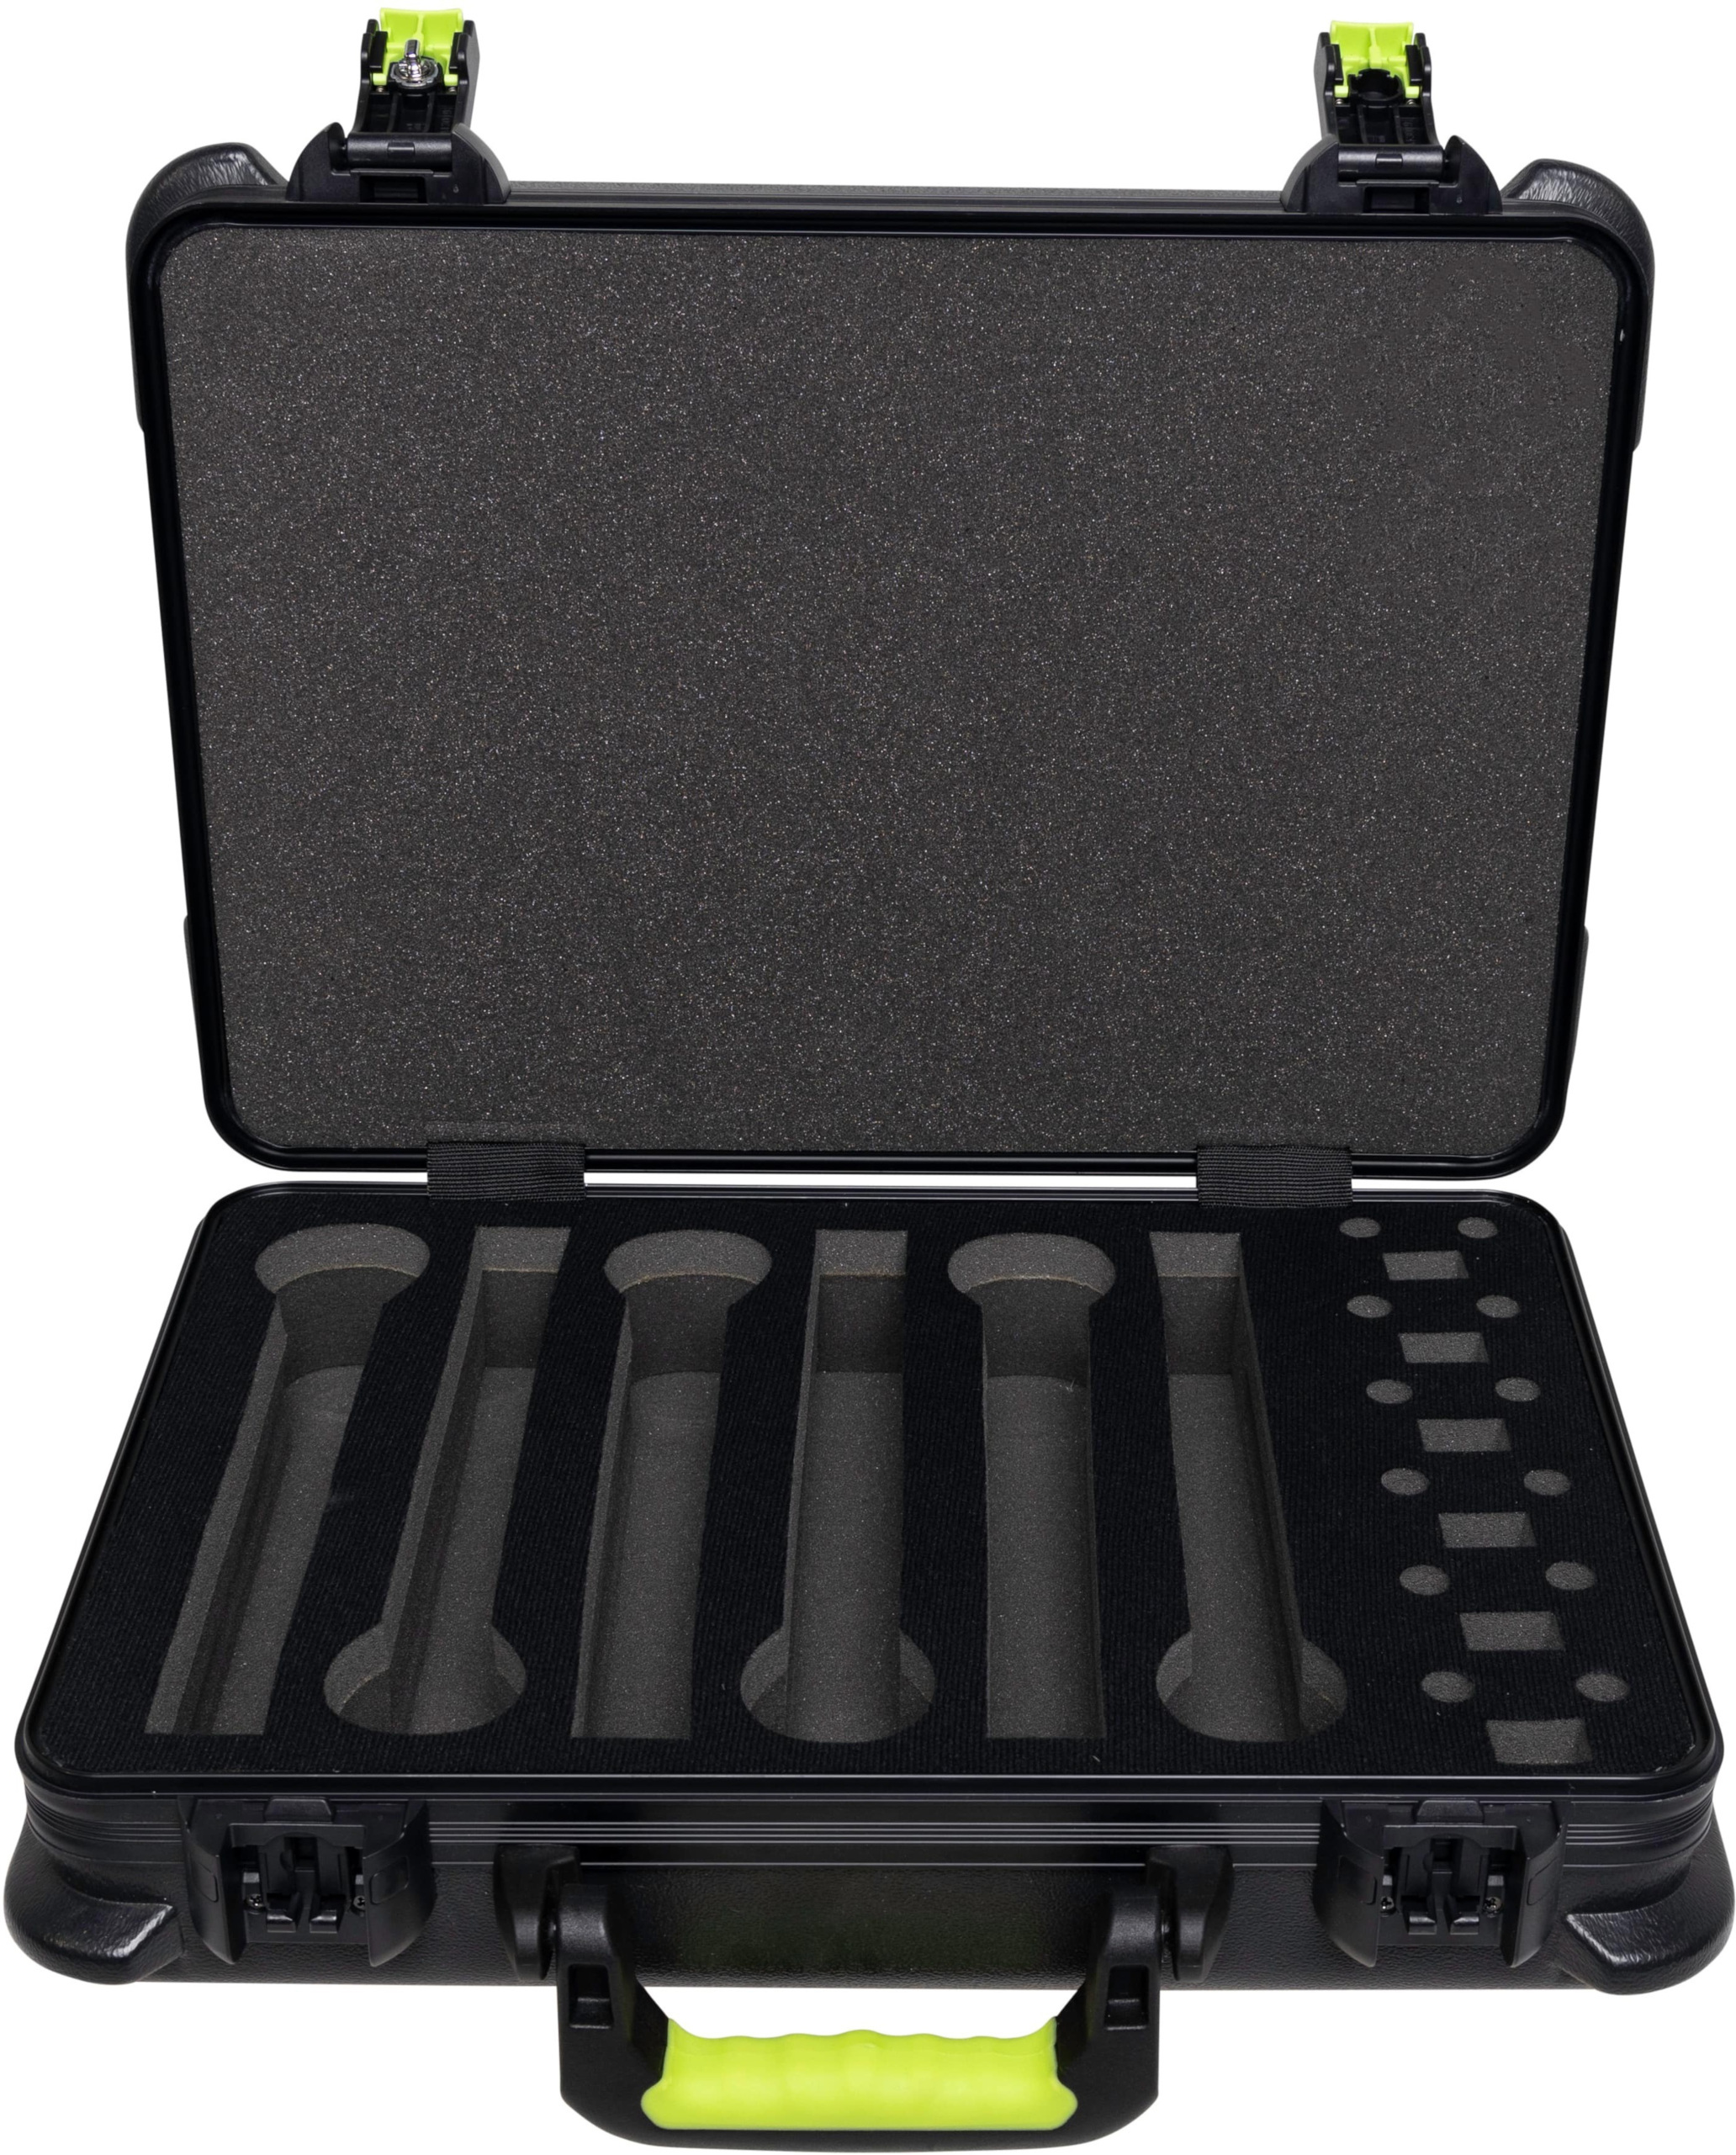 Gator Frameworks Mic Case W06 - Valise Pour 6 Micros Sans-fils - Microfoonkoffer - Main picture